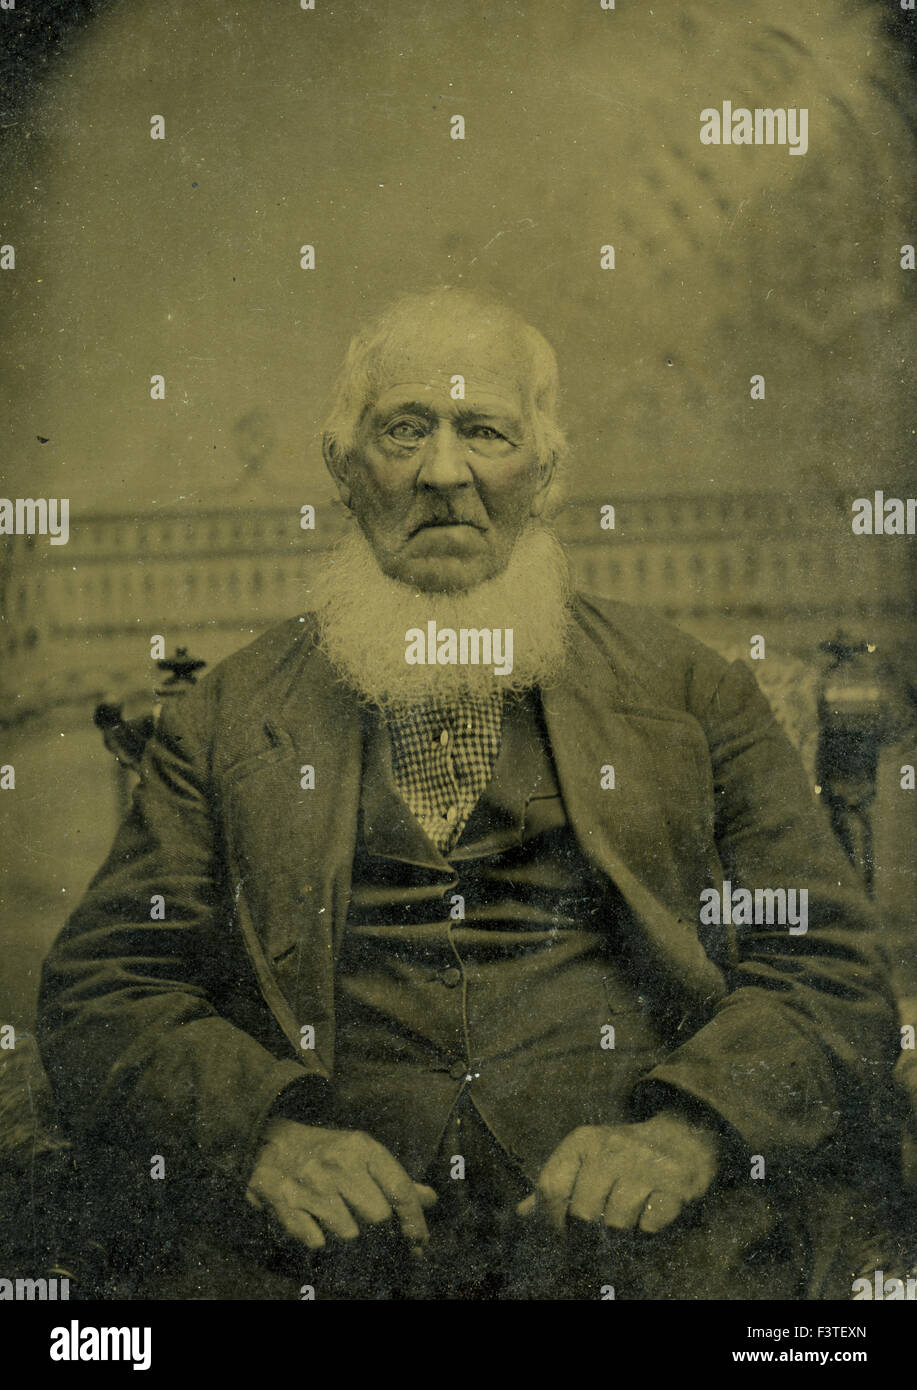 Older man with a white beard in suit seated in chair during a photo sitting that produced a tin-type photograph during the late 1800s in the United States of America. Stock Photo